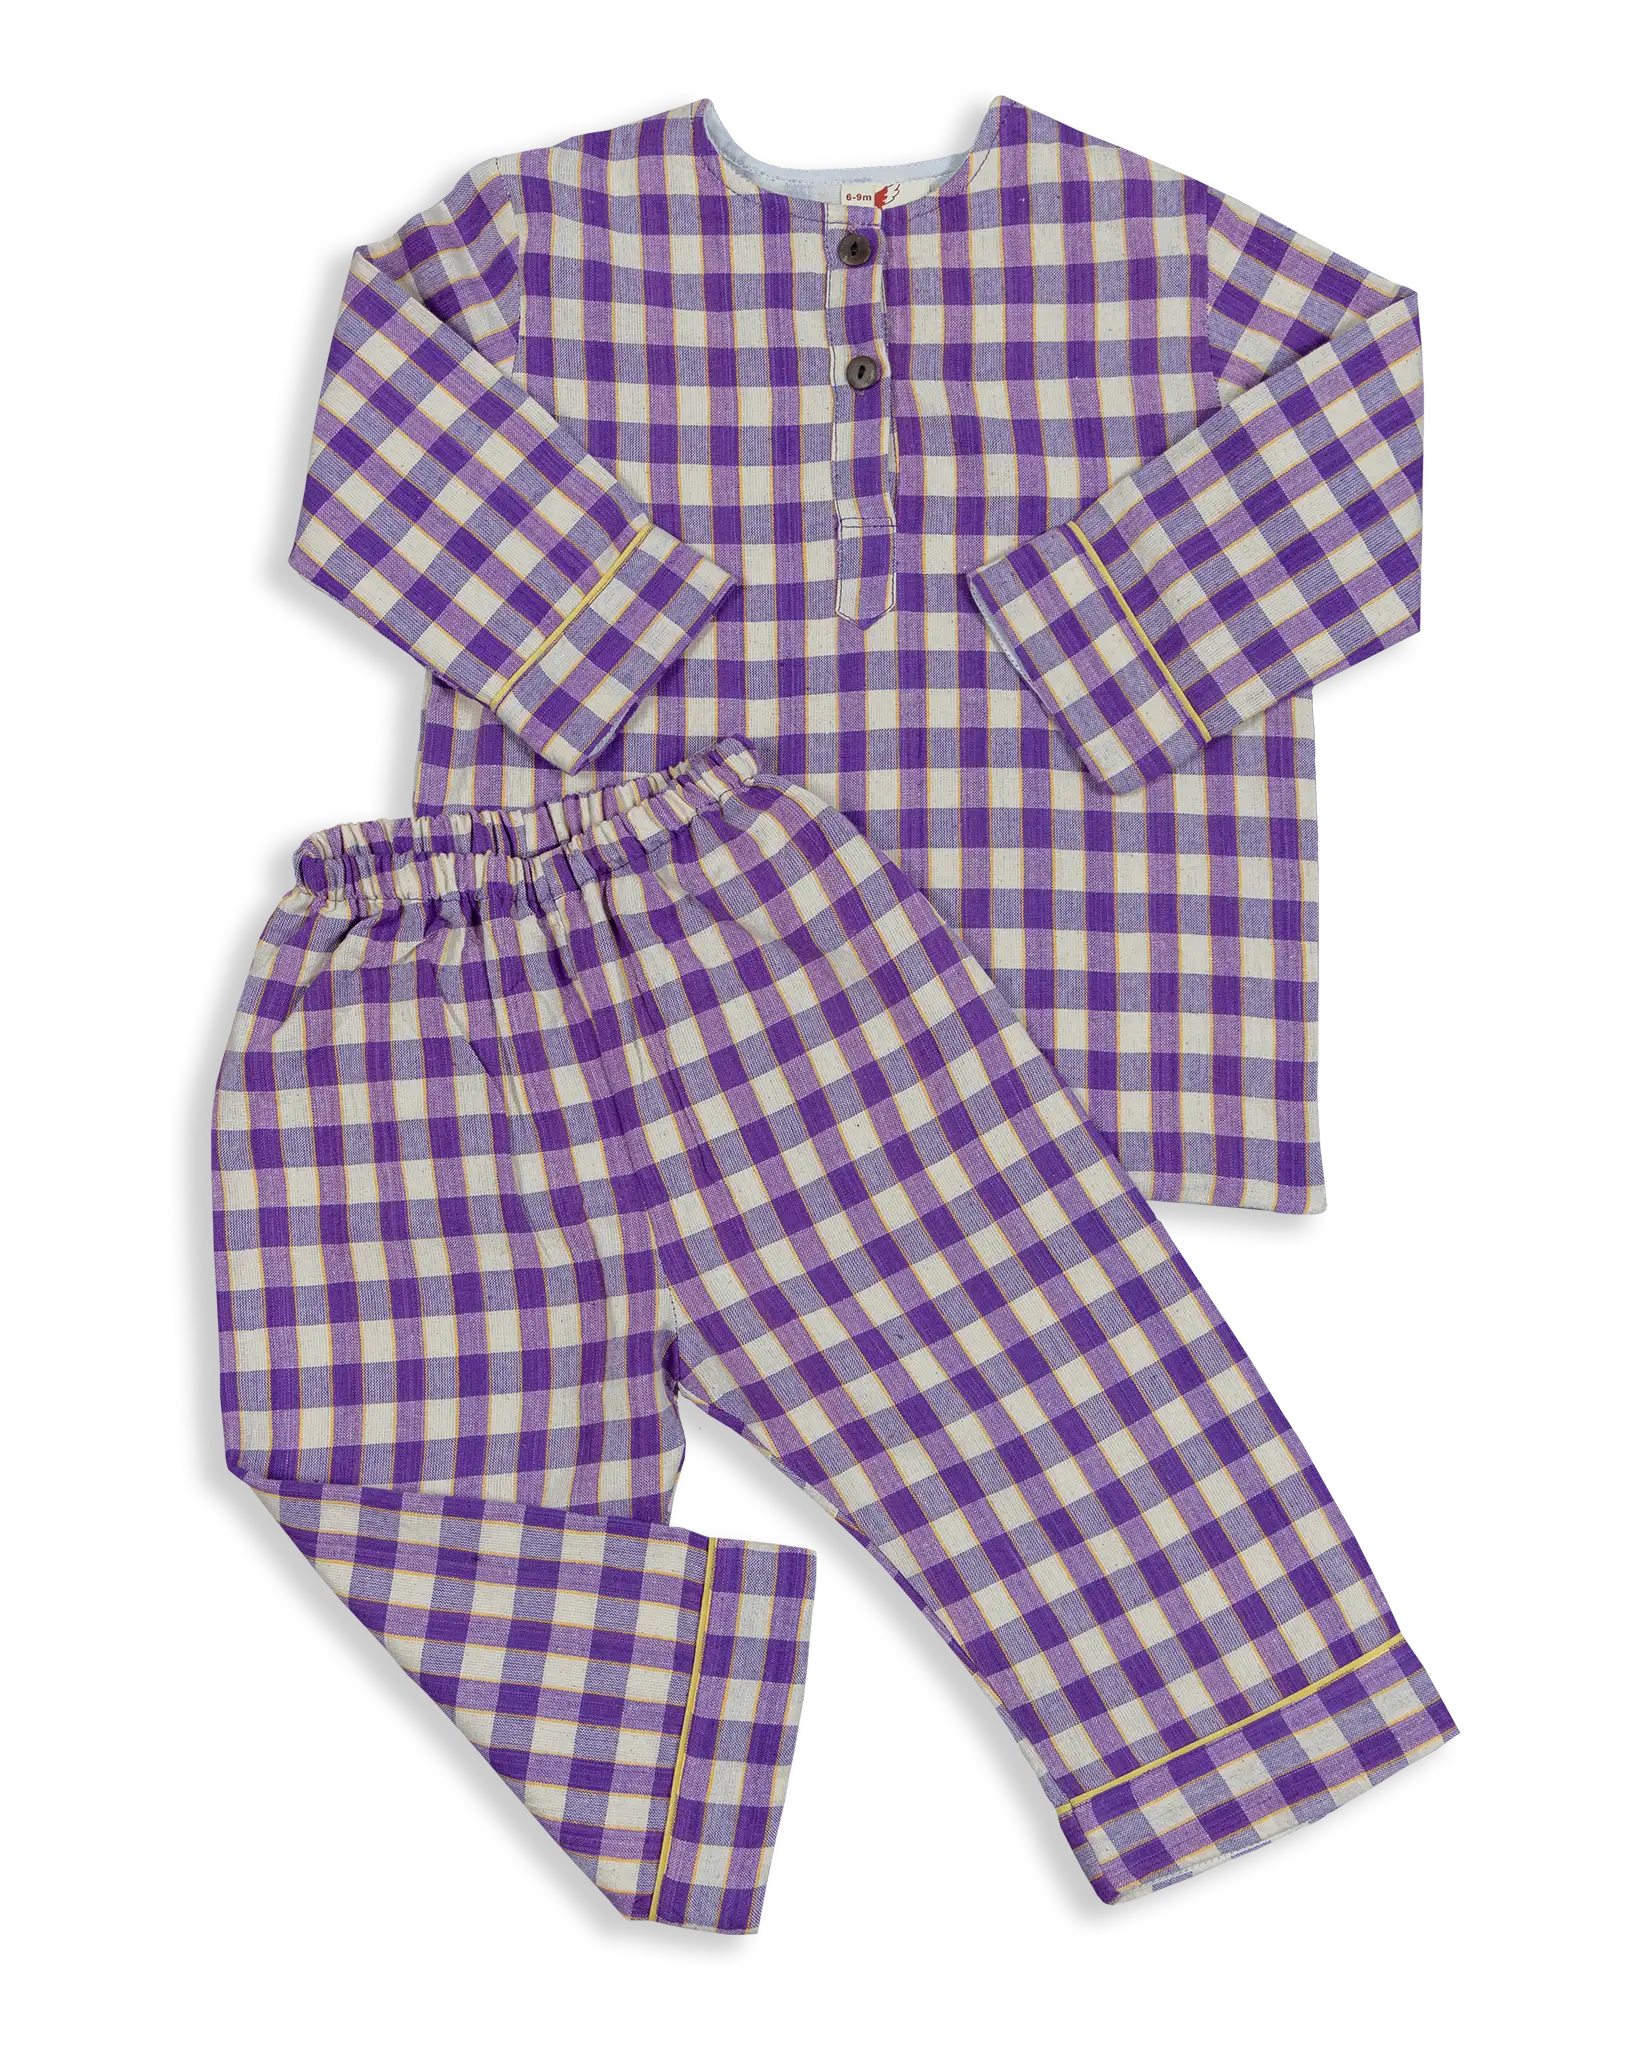 These classic cotton checked Pyjamas are some of our best selling products. Designed and woven here in Nepal they are made with the finest voile lining. It is also known as cotton cashmere, well known and used for kids wear due to the softness and its breathable nature. These unisex pyjamas are soft and sensitive to the skin, offering you peace of mind when dressing your baby. High quality and comfortable - the perfect addition to any baby wardrobe.